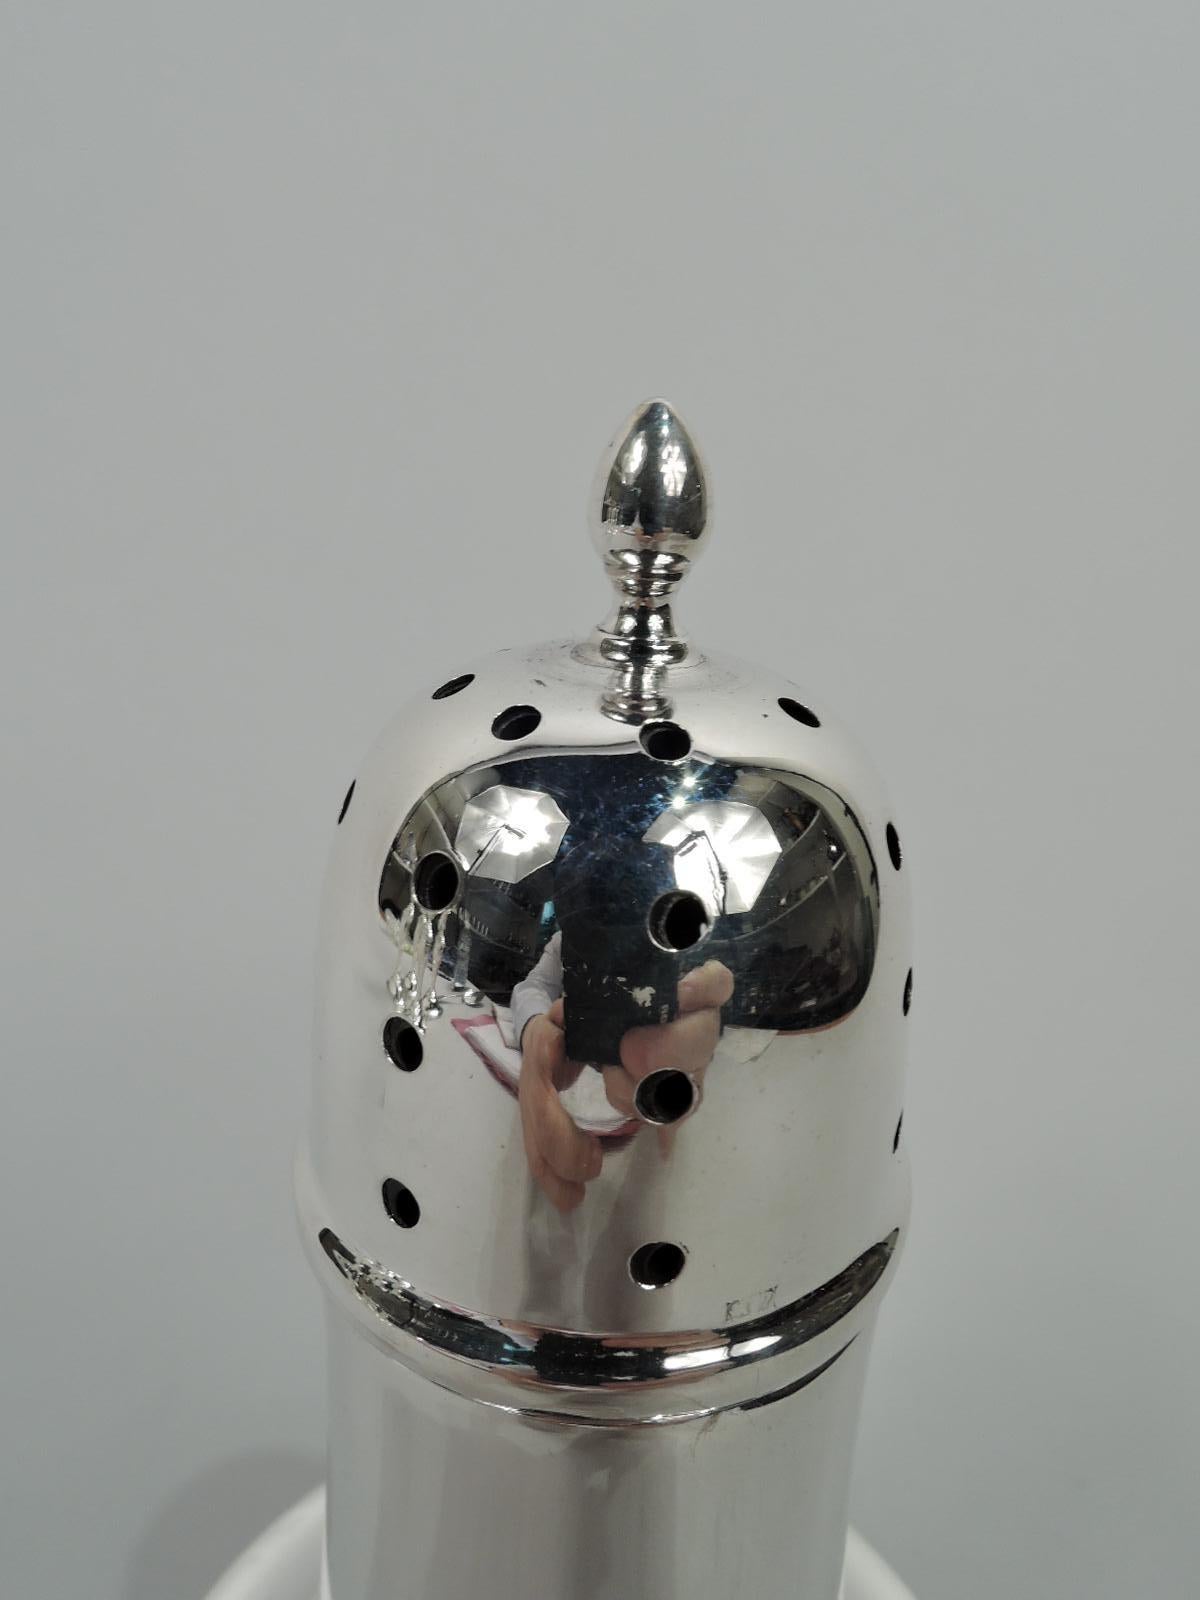 Elizabeth II sterling silver sugar caster. Made by J Collyer Ltd in Birmingham 1958. Upward tapering neck and curved bowl on short foot. Cover domed and pierced with ovoid finial. Plastic lining and cover threads. Fully marked. Gross weight: 4 troy